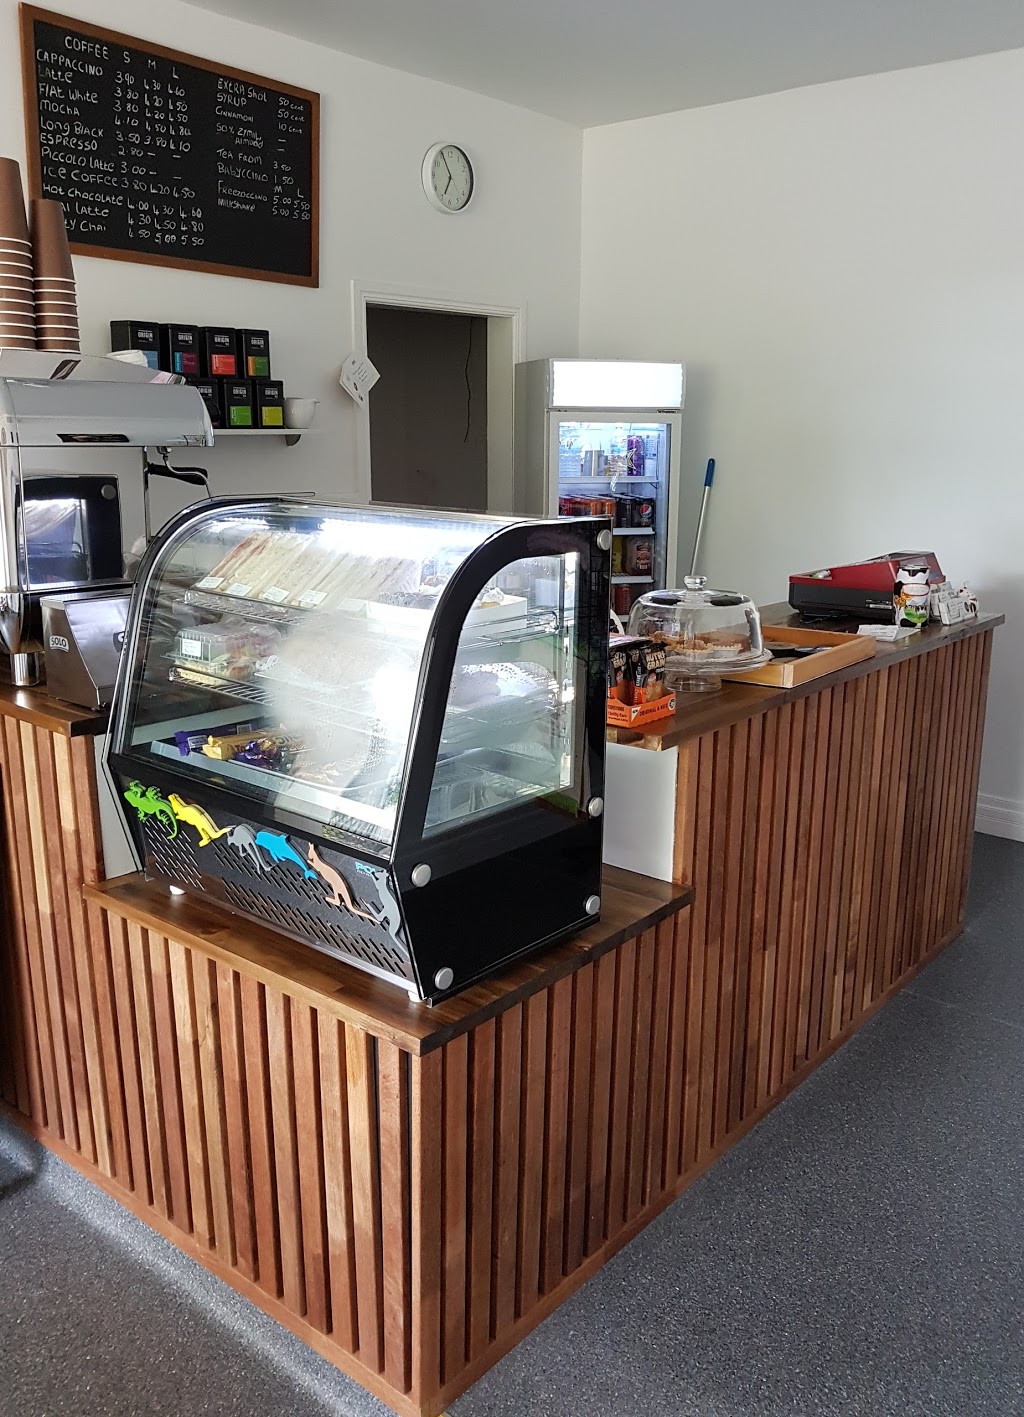 3Js Coffee & Gifts | cafe | 101 Kate St, Woody Point QLD 4019, Australia | 0424933635 OR +61 424 933 635